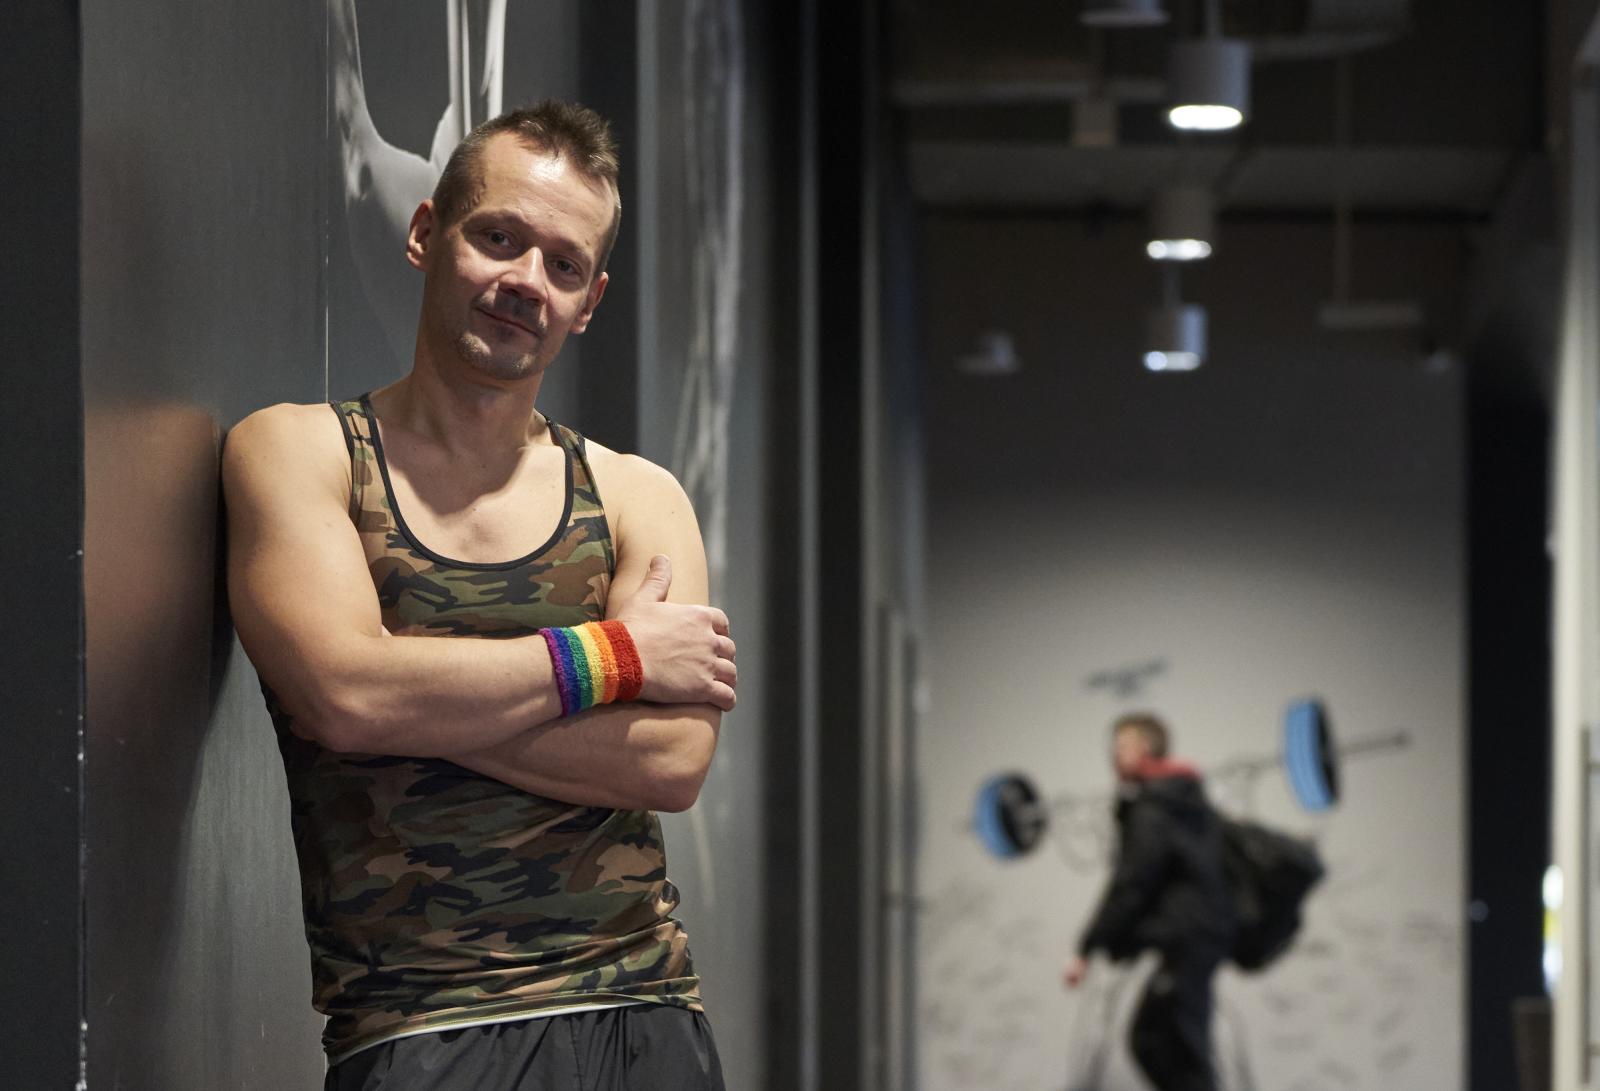 Portraits - Andrzej, Ironman and leader of queer sports group...